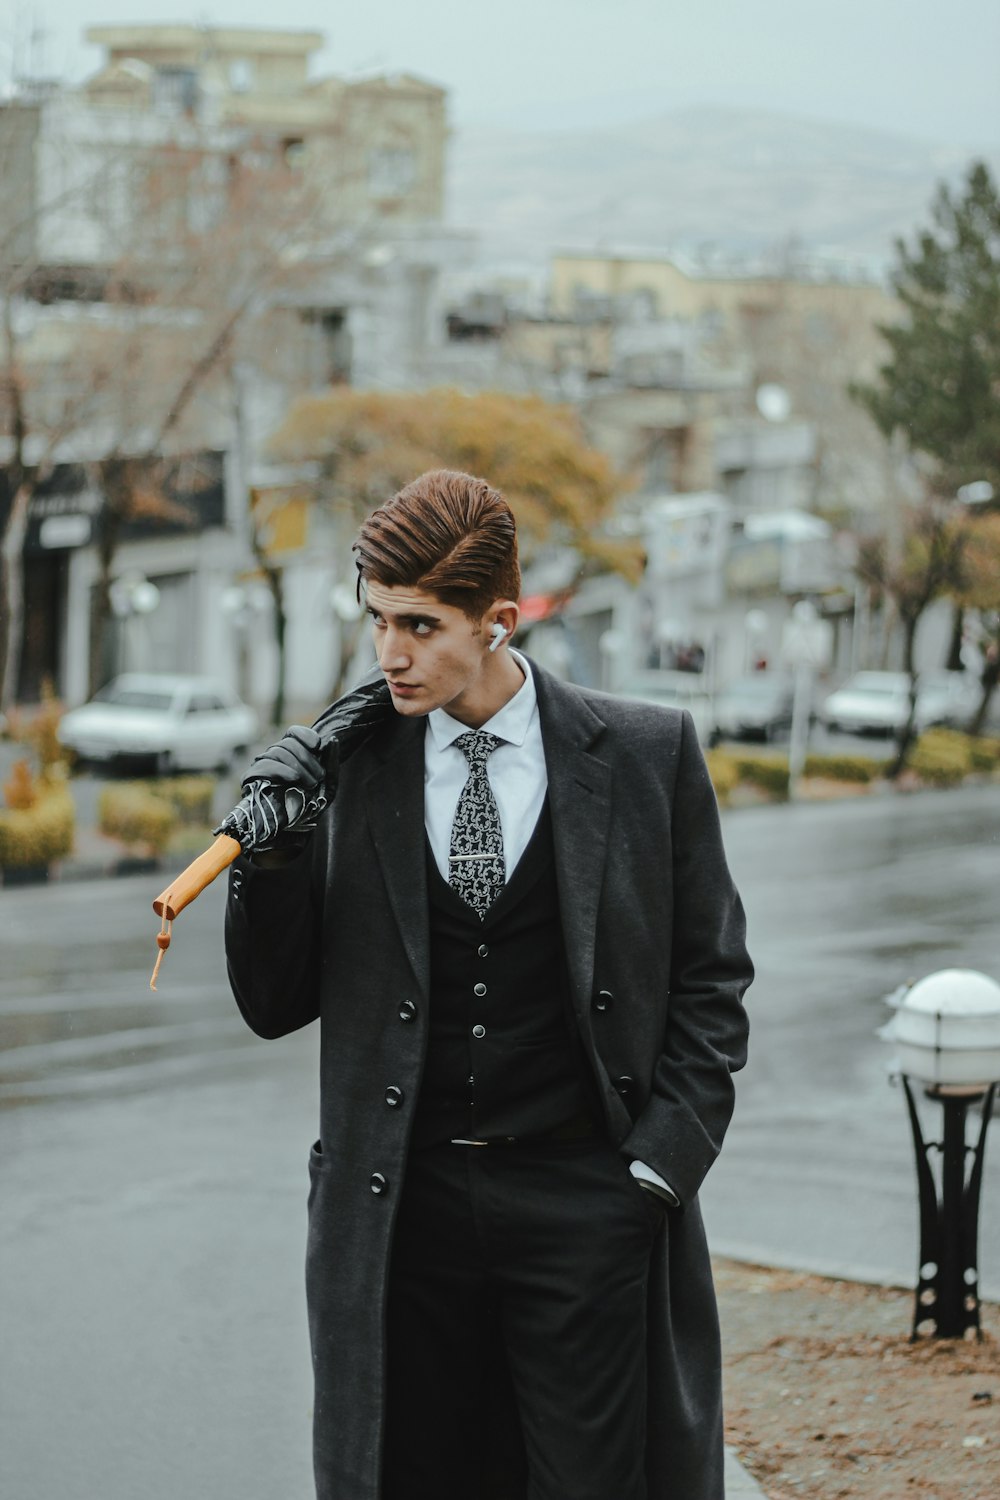 a man in a suit and tie holding an umbrella